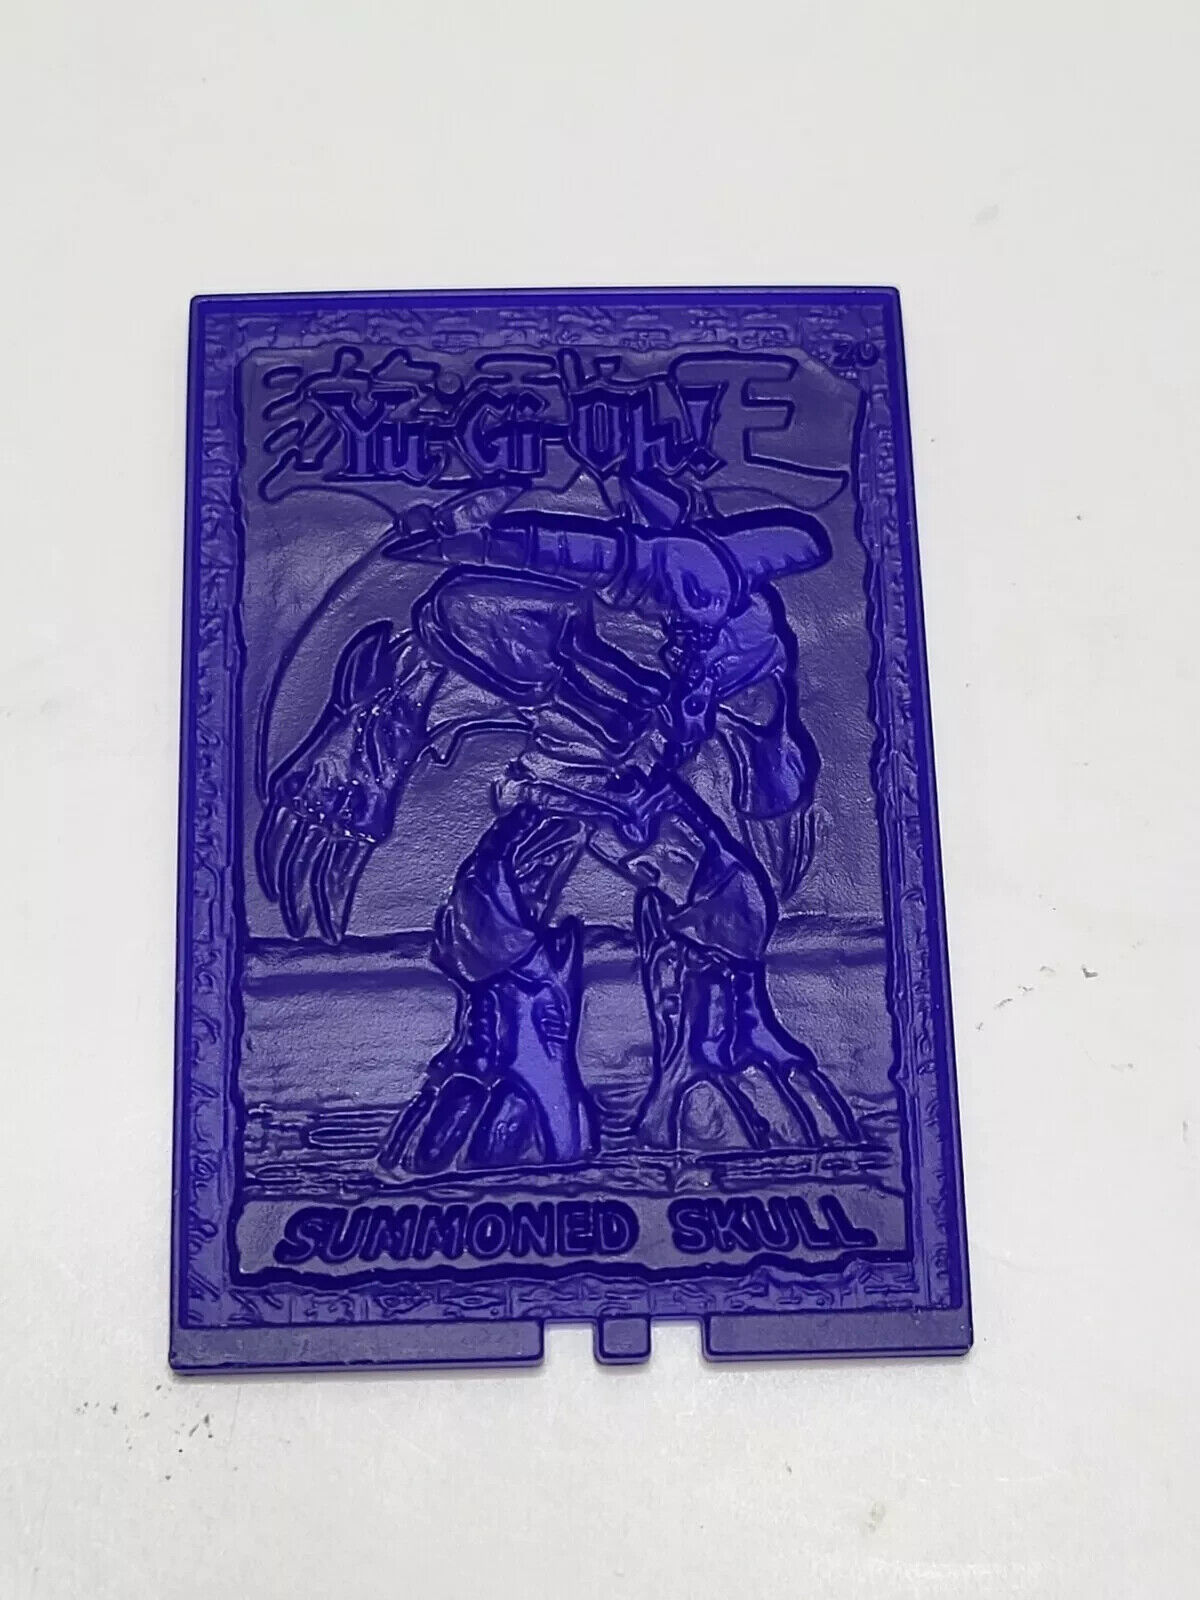 Collectible Yugioh Summoned Skull Blue Hard Plastic Tile Card Play Trading Card